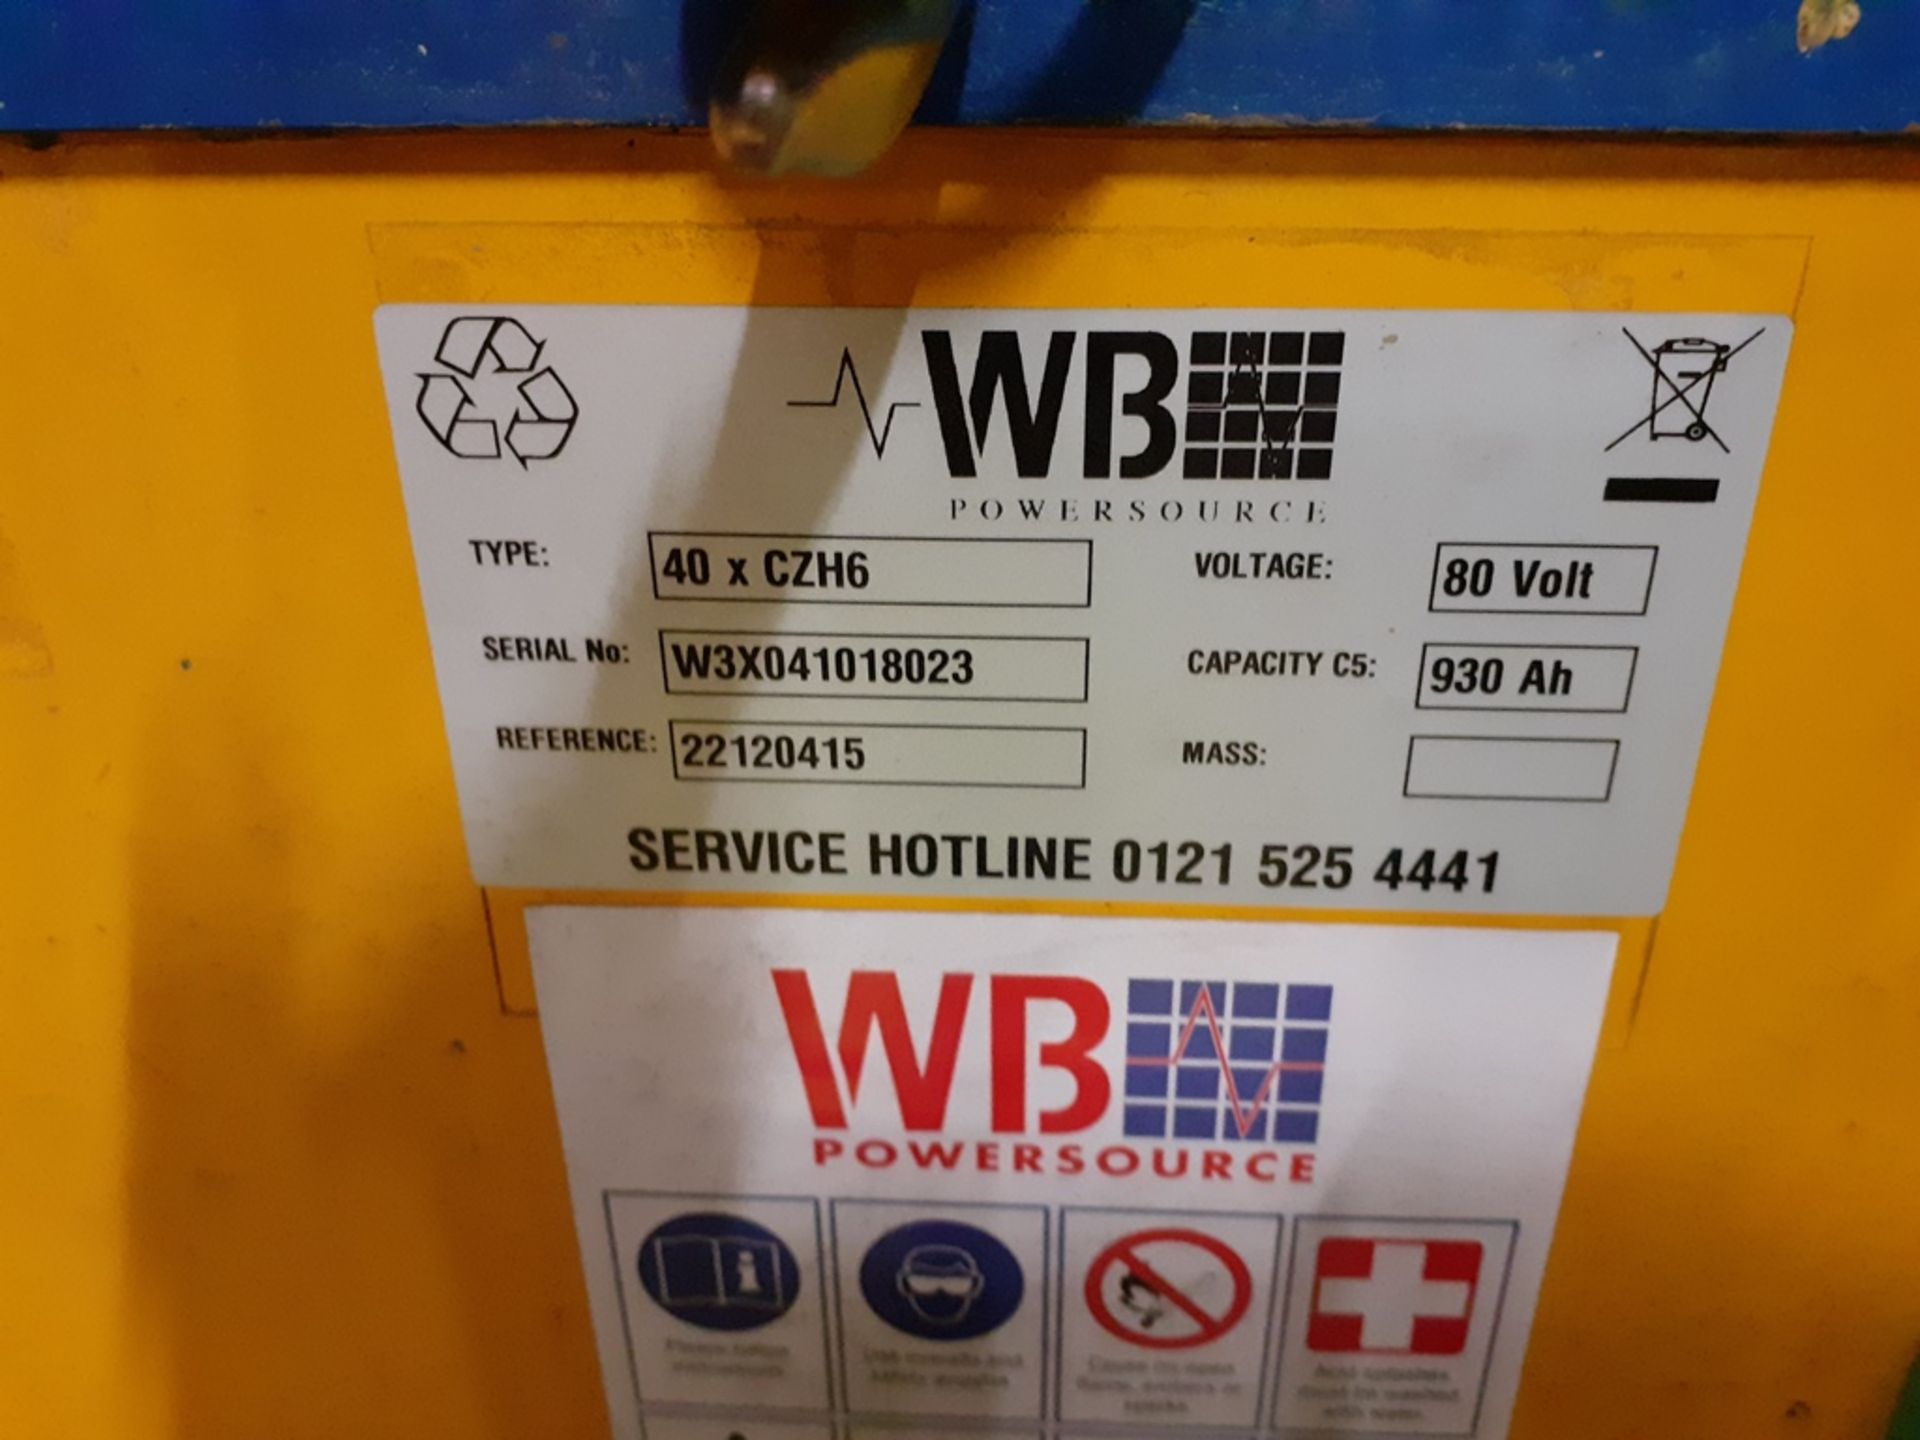 Fork lift Battery in case fits ETV WB40xczh6 (Carriage not included) - Image 3 of 3